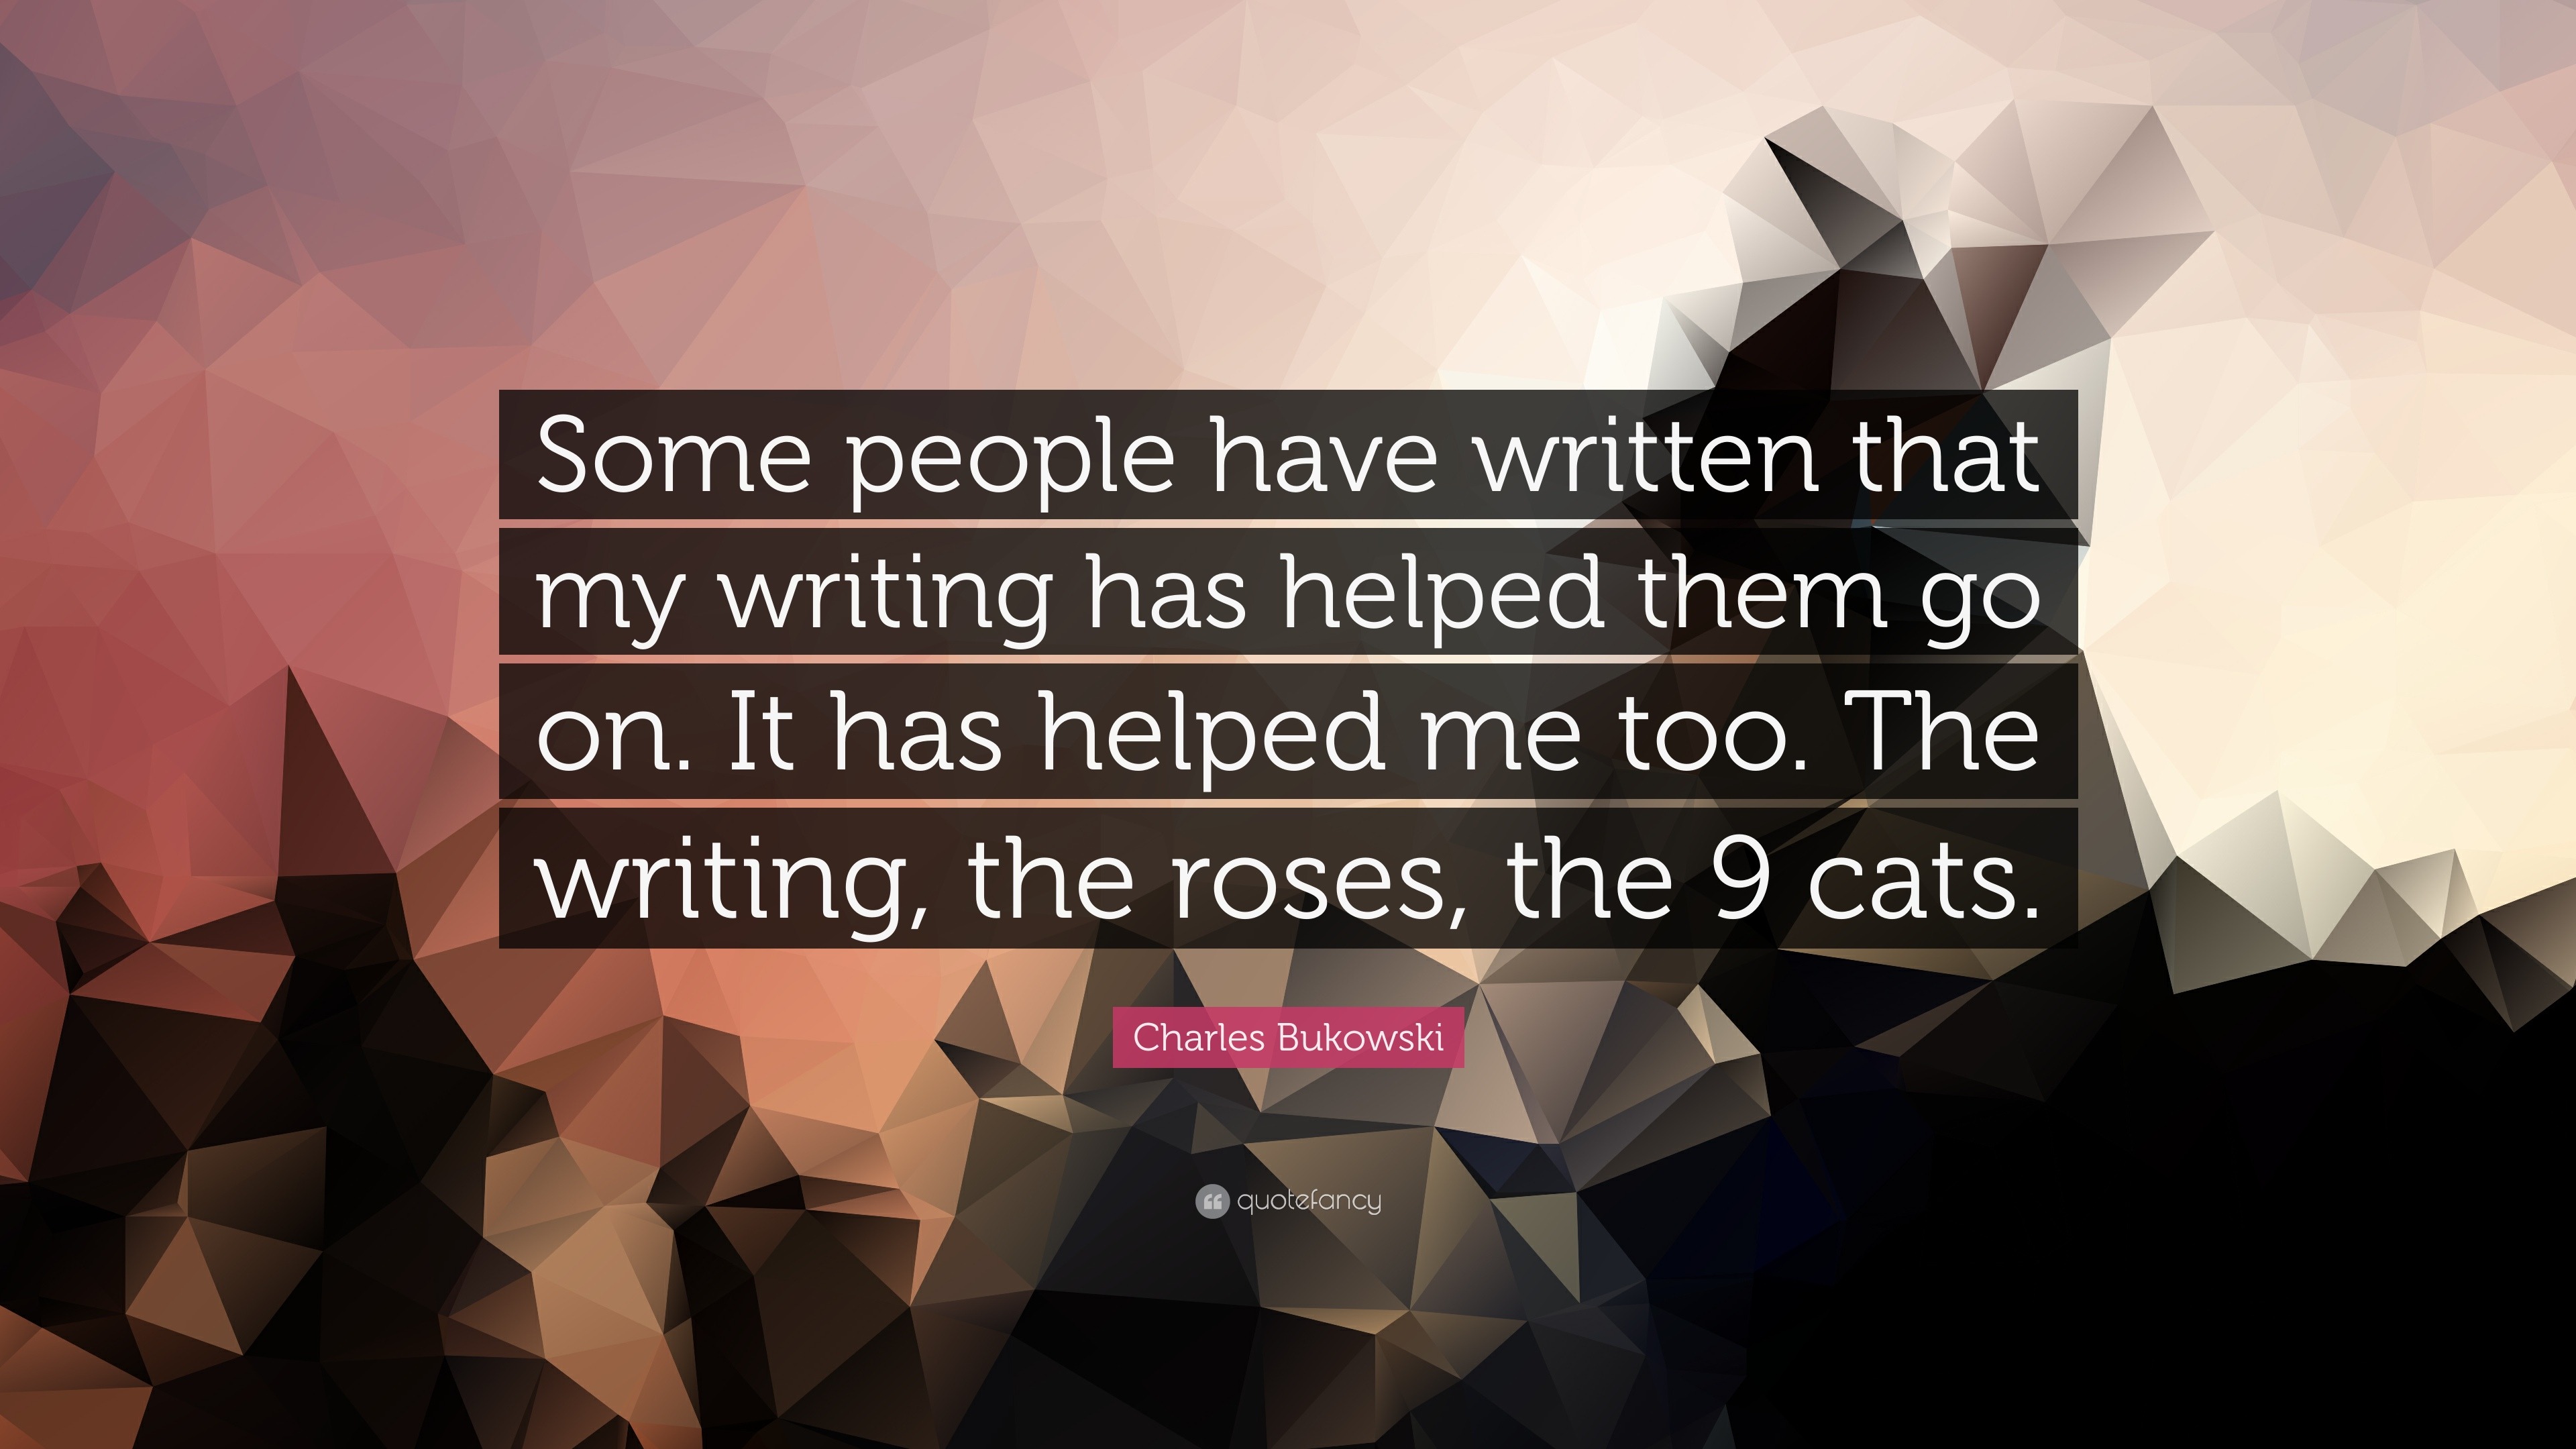 Charles Bukowski Quote: “Some people have written that my writing has  helped them go on. It has helped me too. The writing, the roses, the 9  cats”